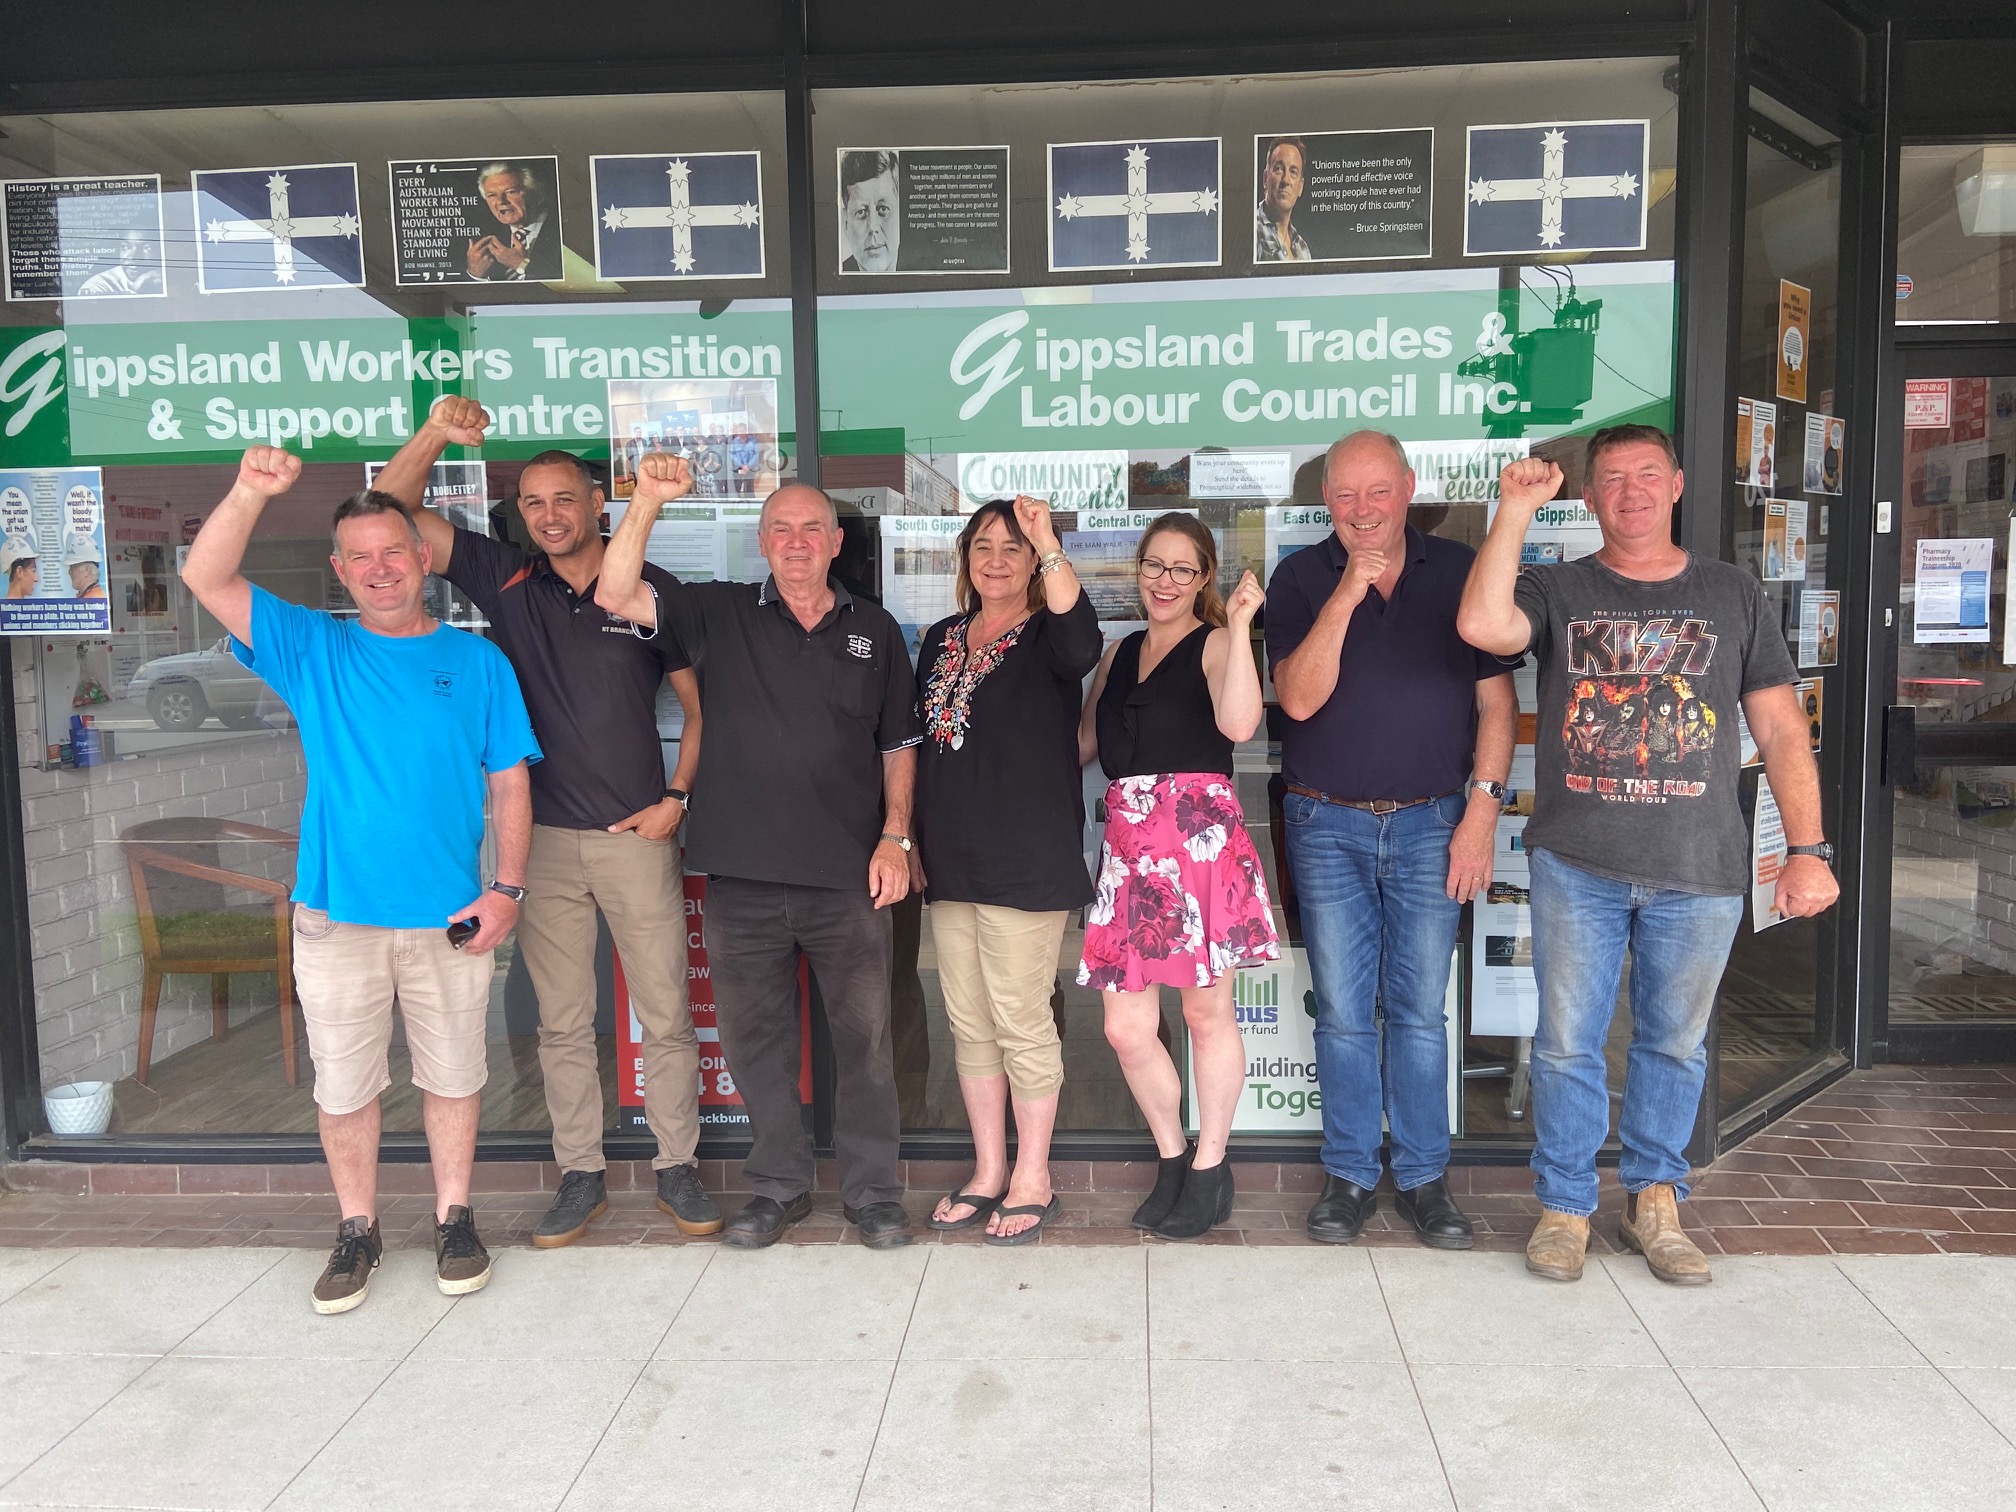 Gippsland Trades and Labour Council